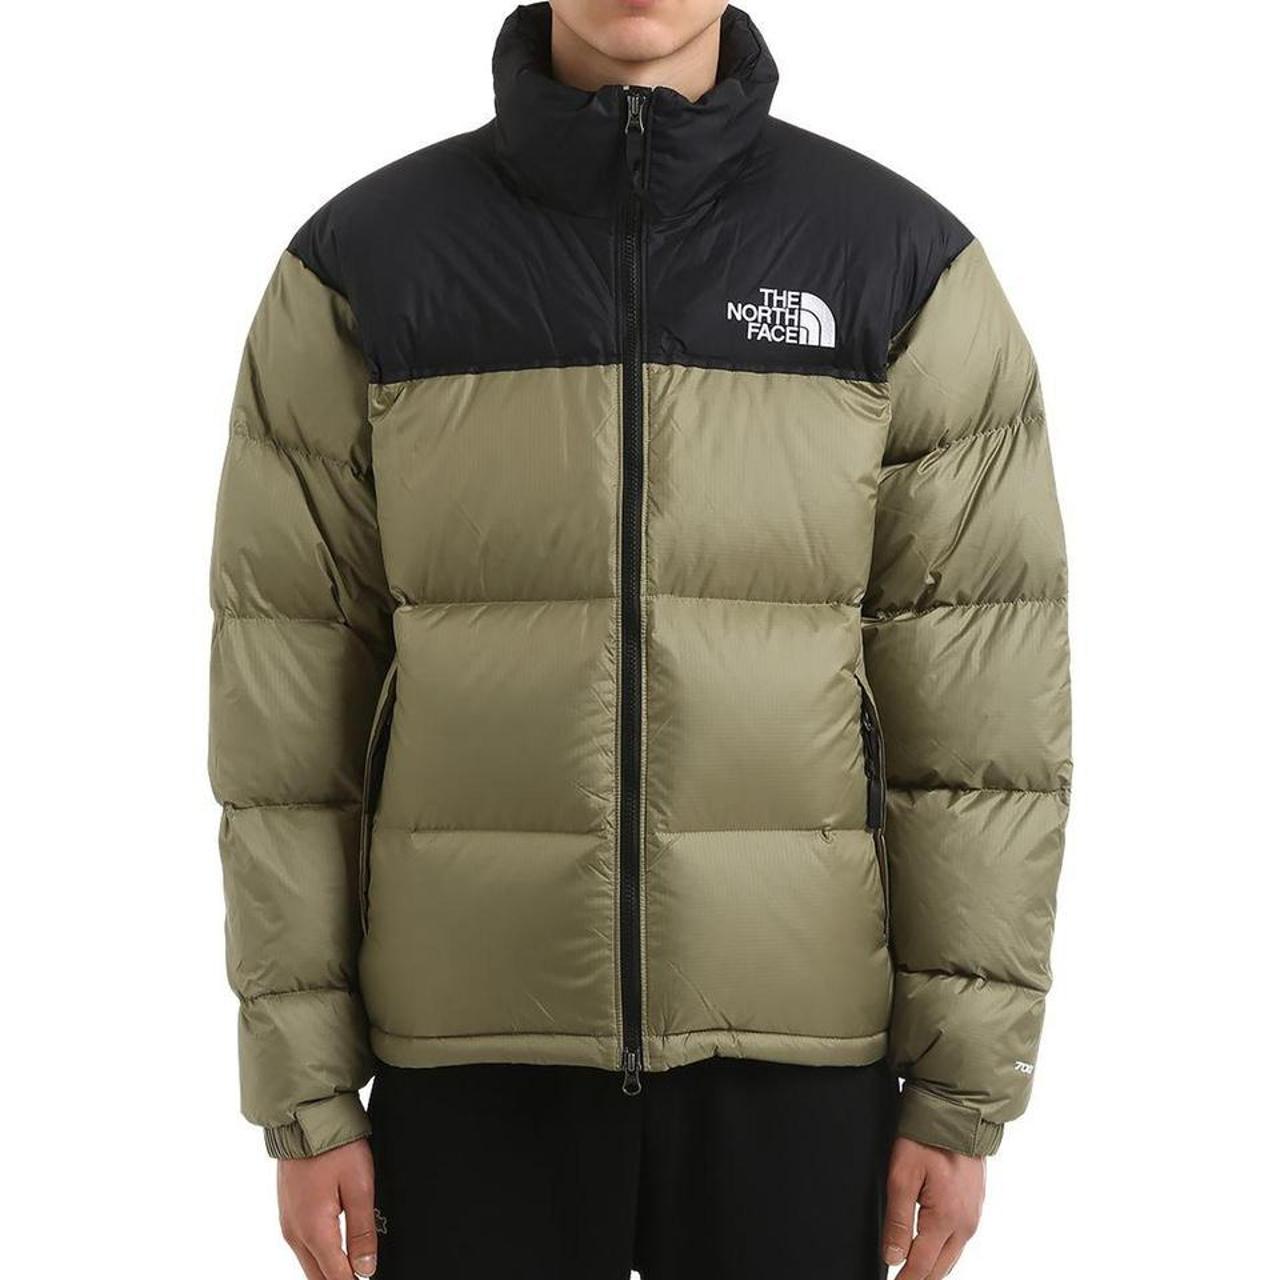 Product Image 1 - The North face puffer 700